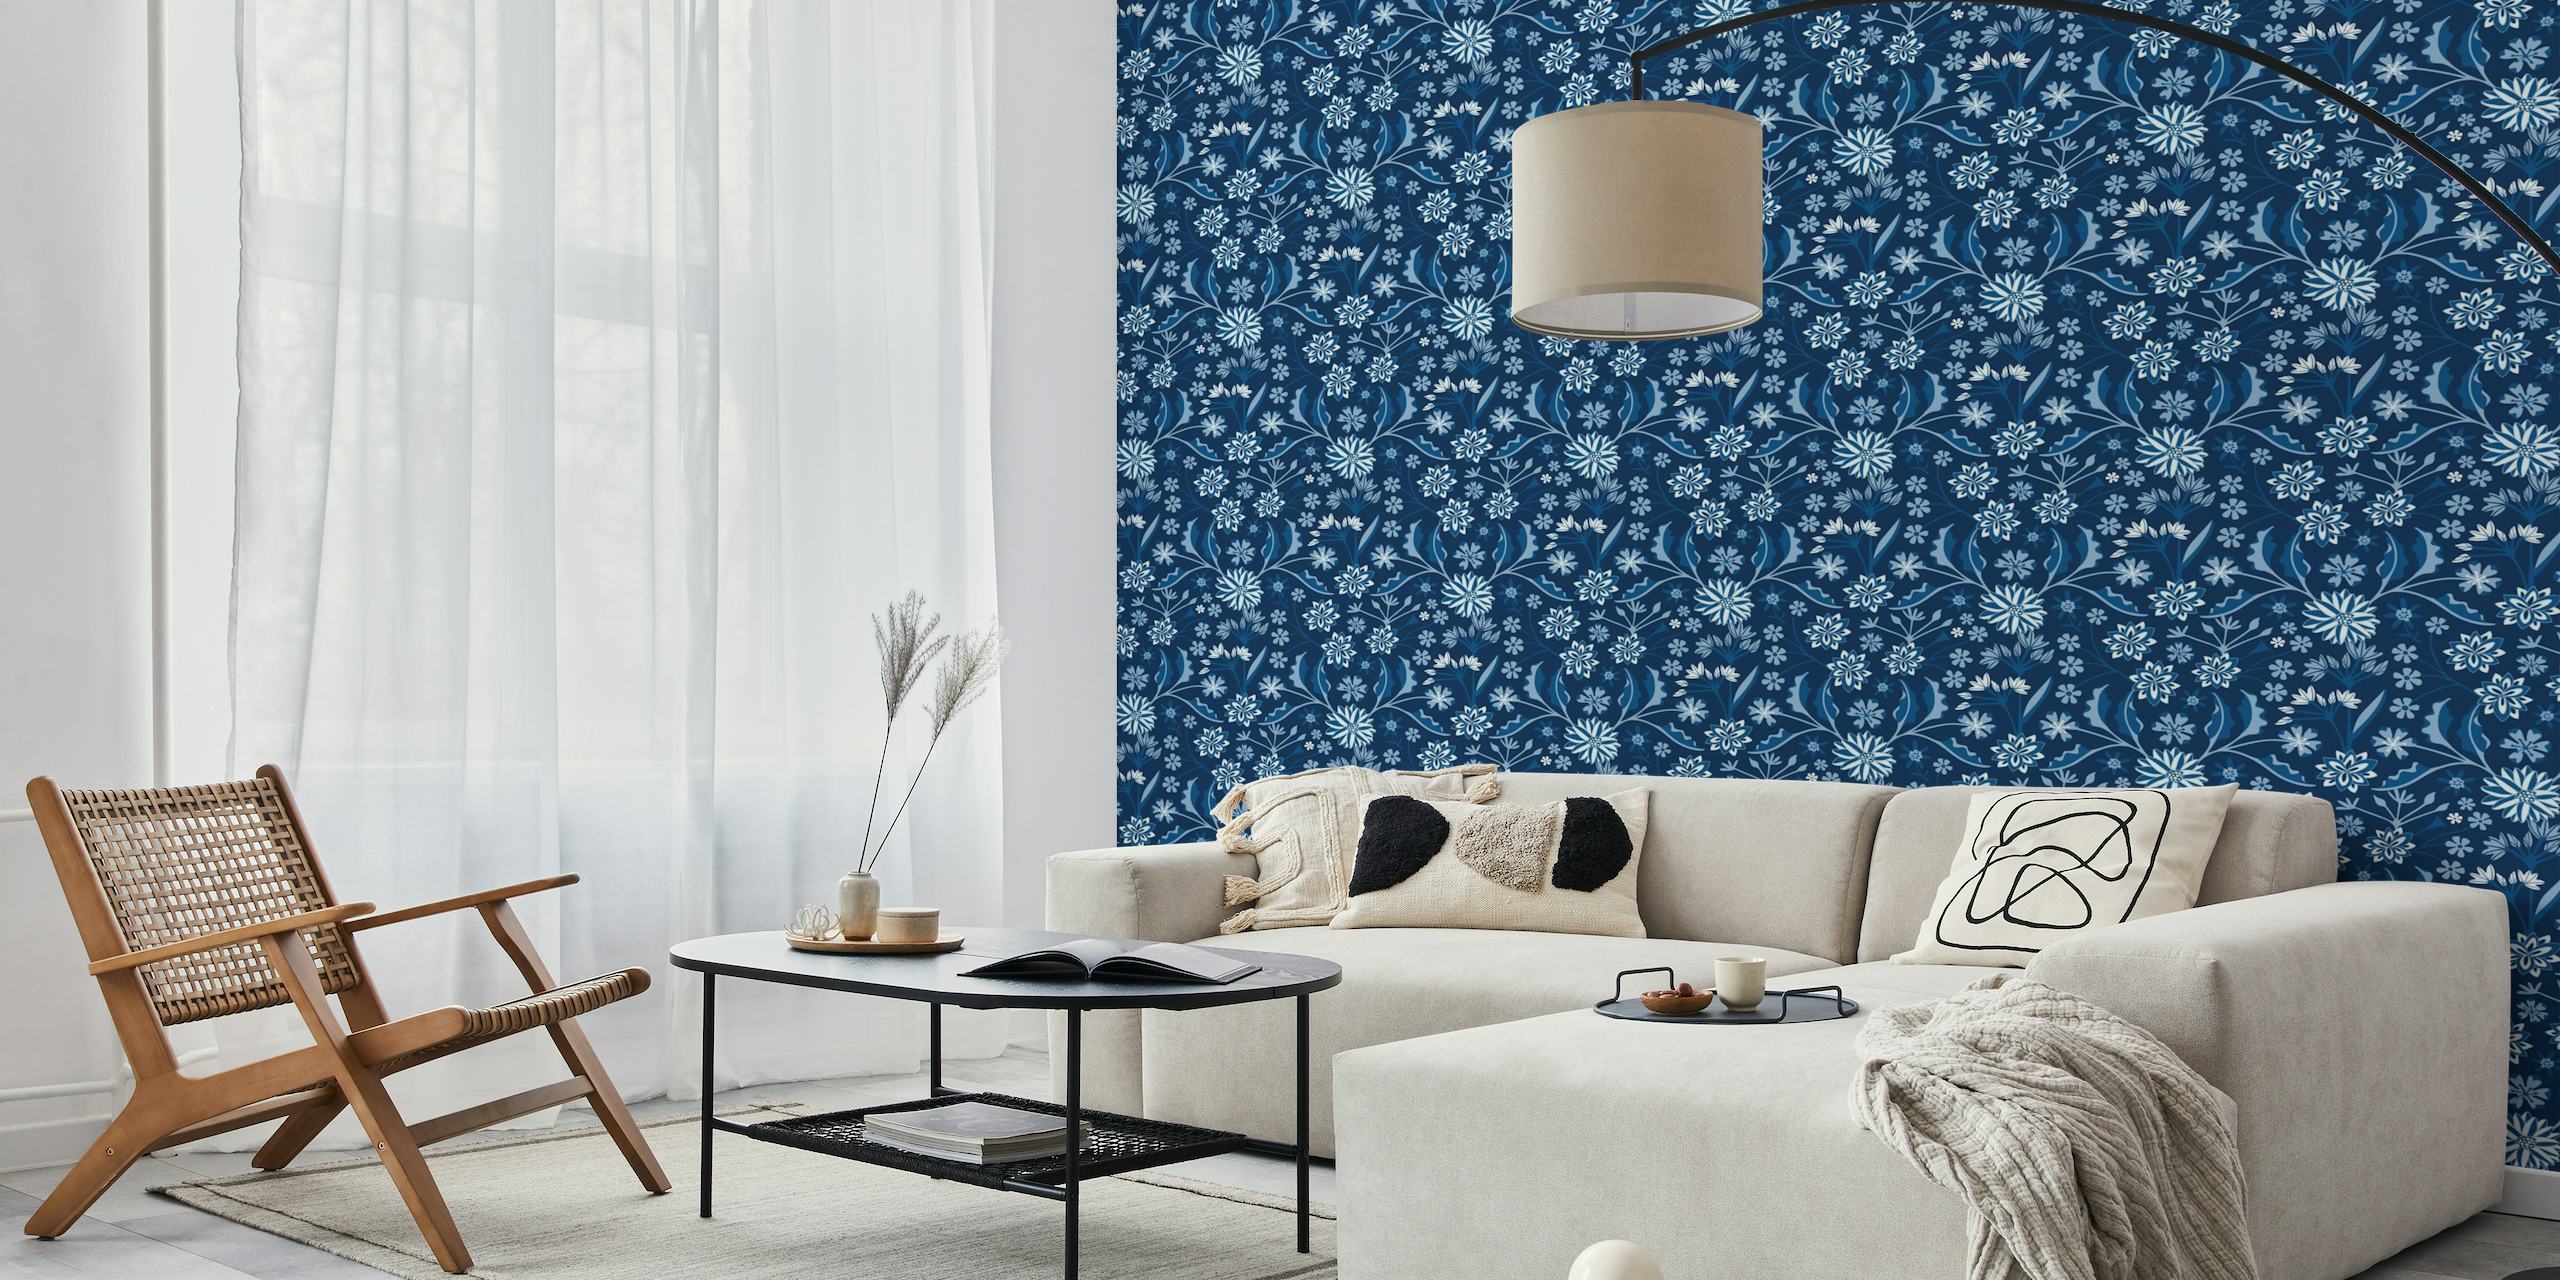 JAIPUR Indian Floral Botanical wall mural in Indigo Blue with intricate floral patterns